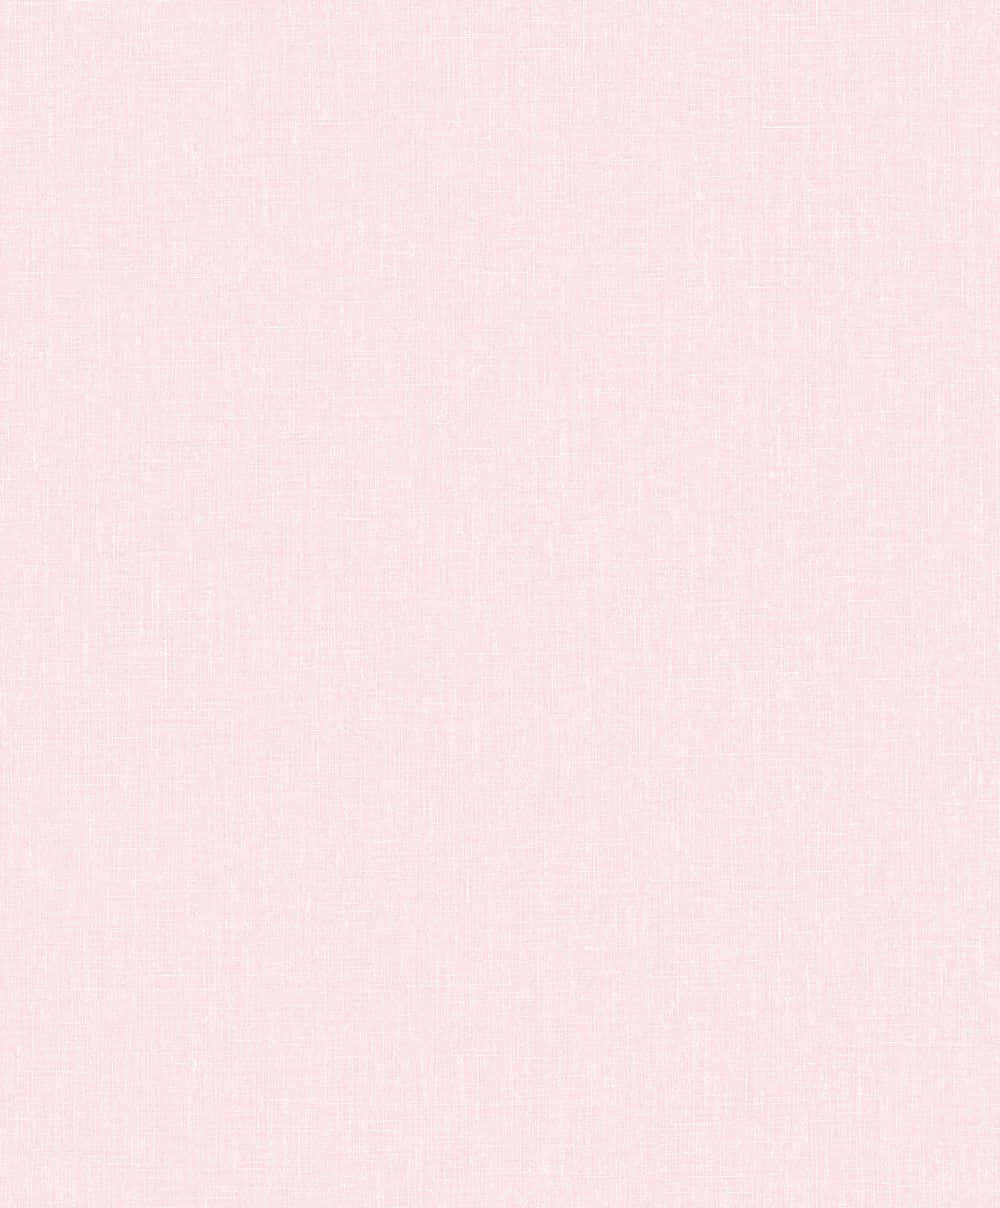 Pastel pink depicts a peaceful ambience